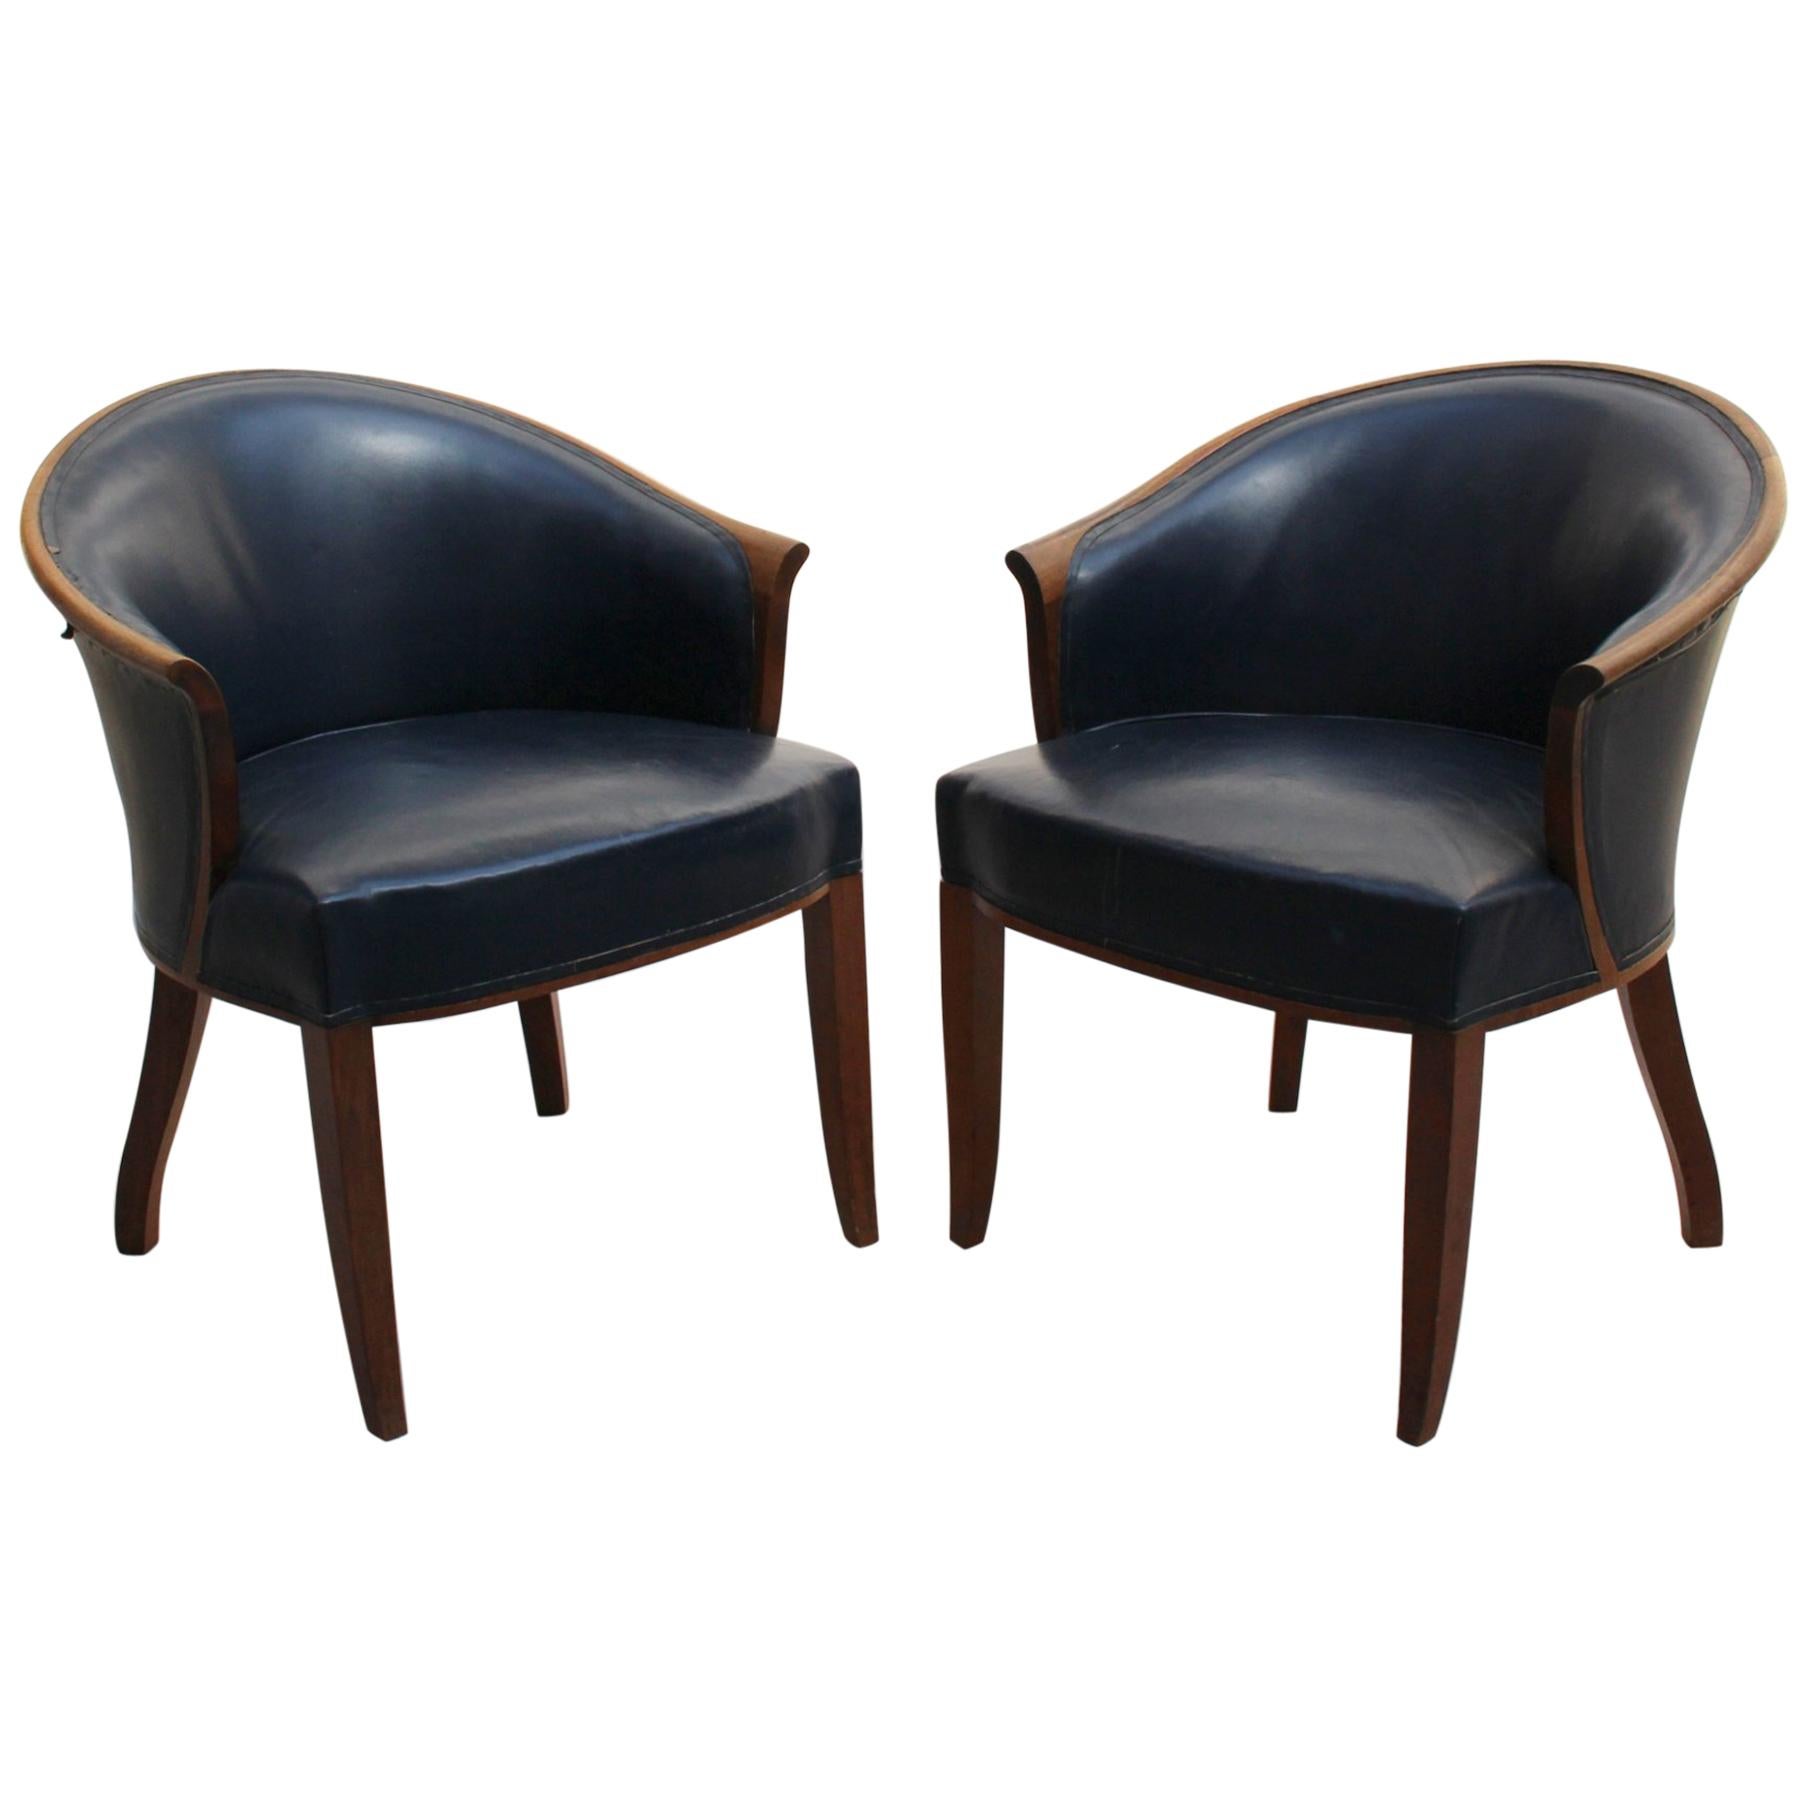 A Pair of Fine French Art Deco Walnut Armchairs by Leleu